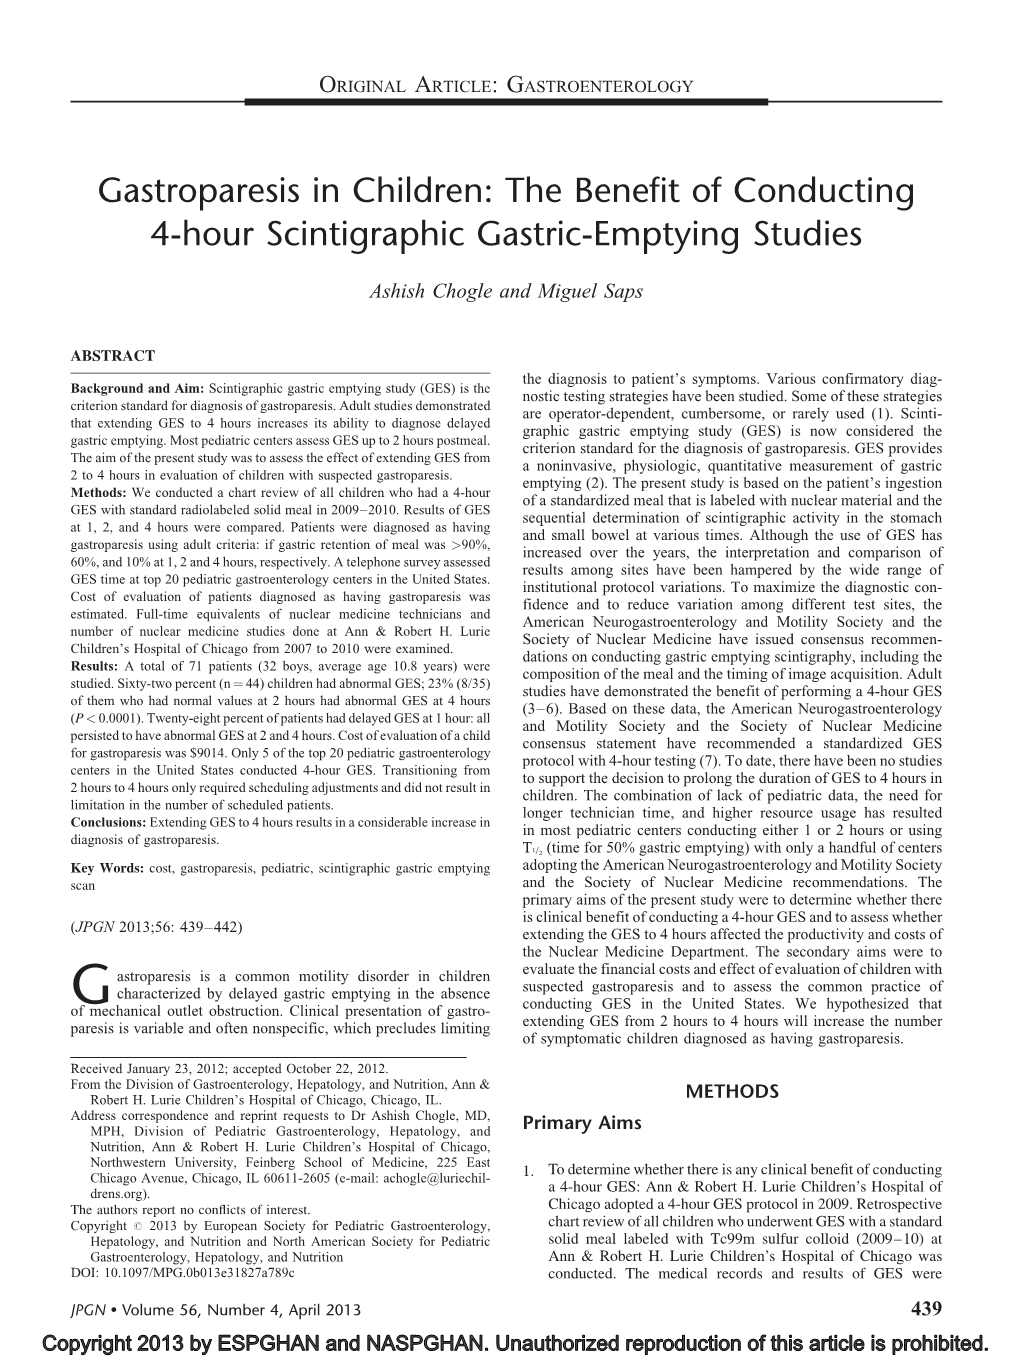 Gastroparesis in Children: the Benefit of Conducting 4-Hour Scintigraphic Gastric-Emptying Studies